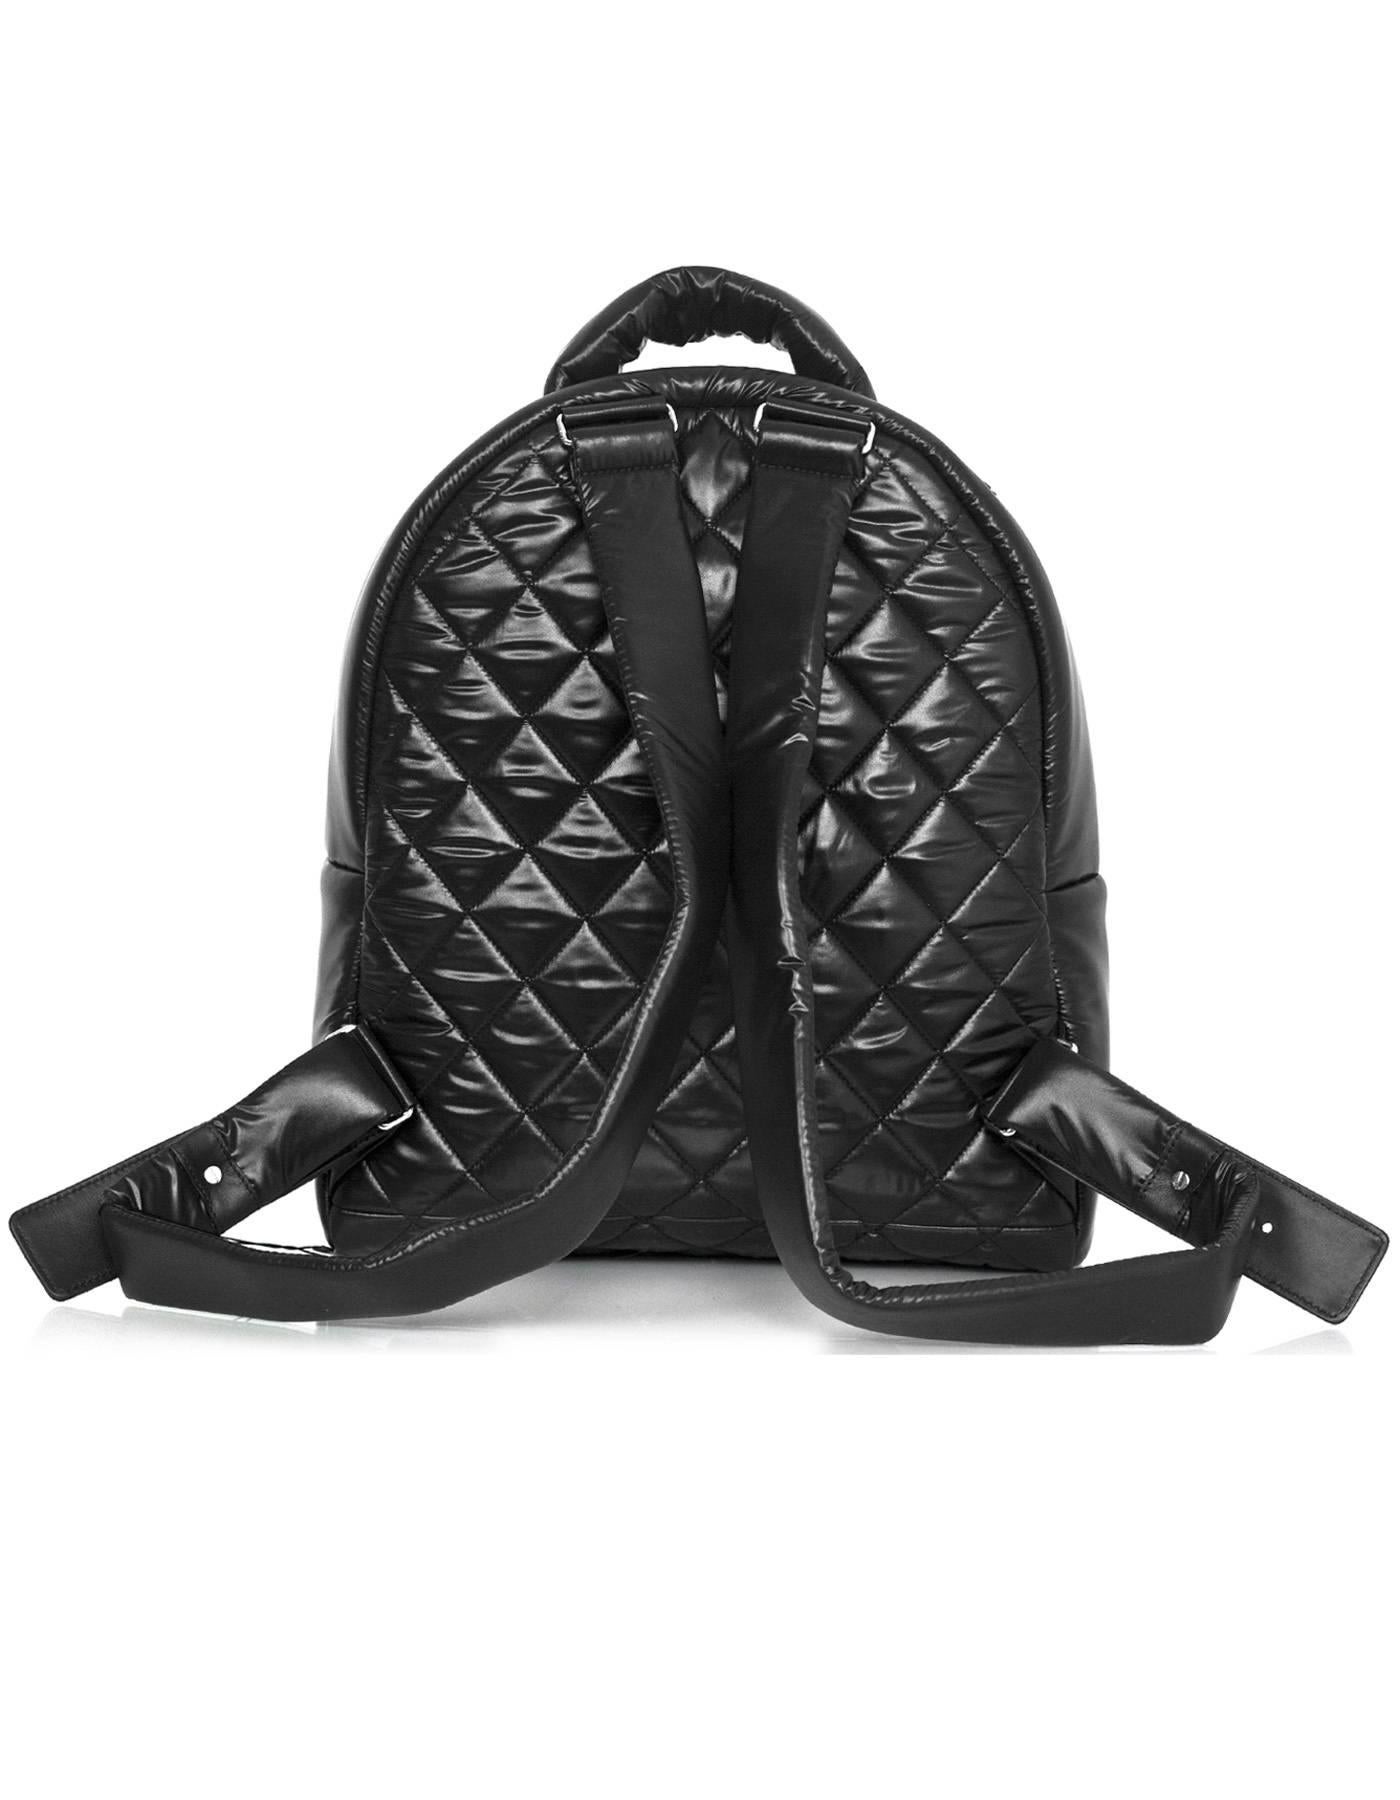 Chanel NEW Black Quilted Nylon Coco Cocoon Backpack 
Features leather logo on front zipper pocket

Made In: Italy
Year of Production: 2017
Color: Black
Hardware: Silvertone
Materials: Nylon
Lining: Burgundy nylon
Closure/Opening: Zip around